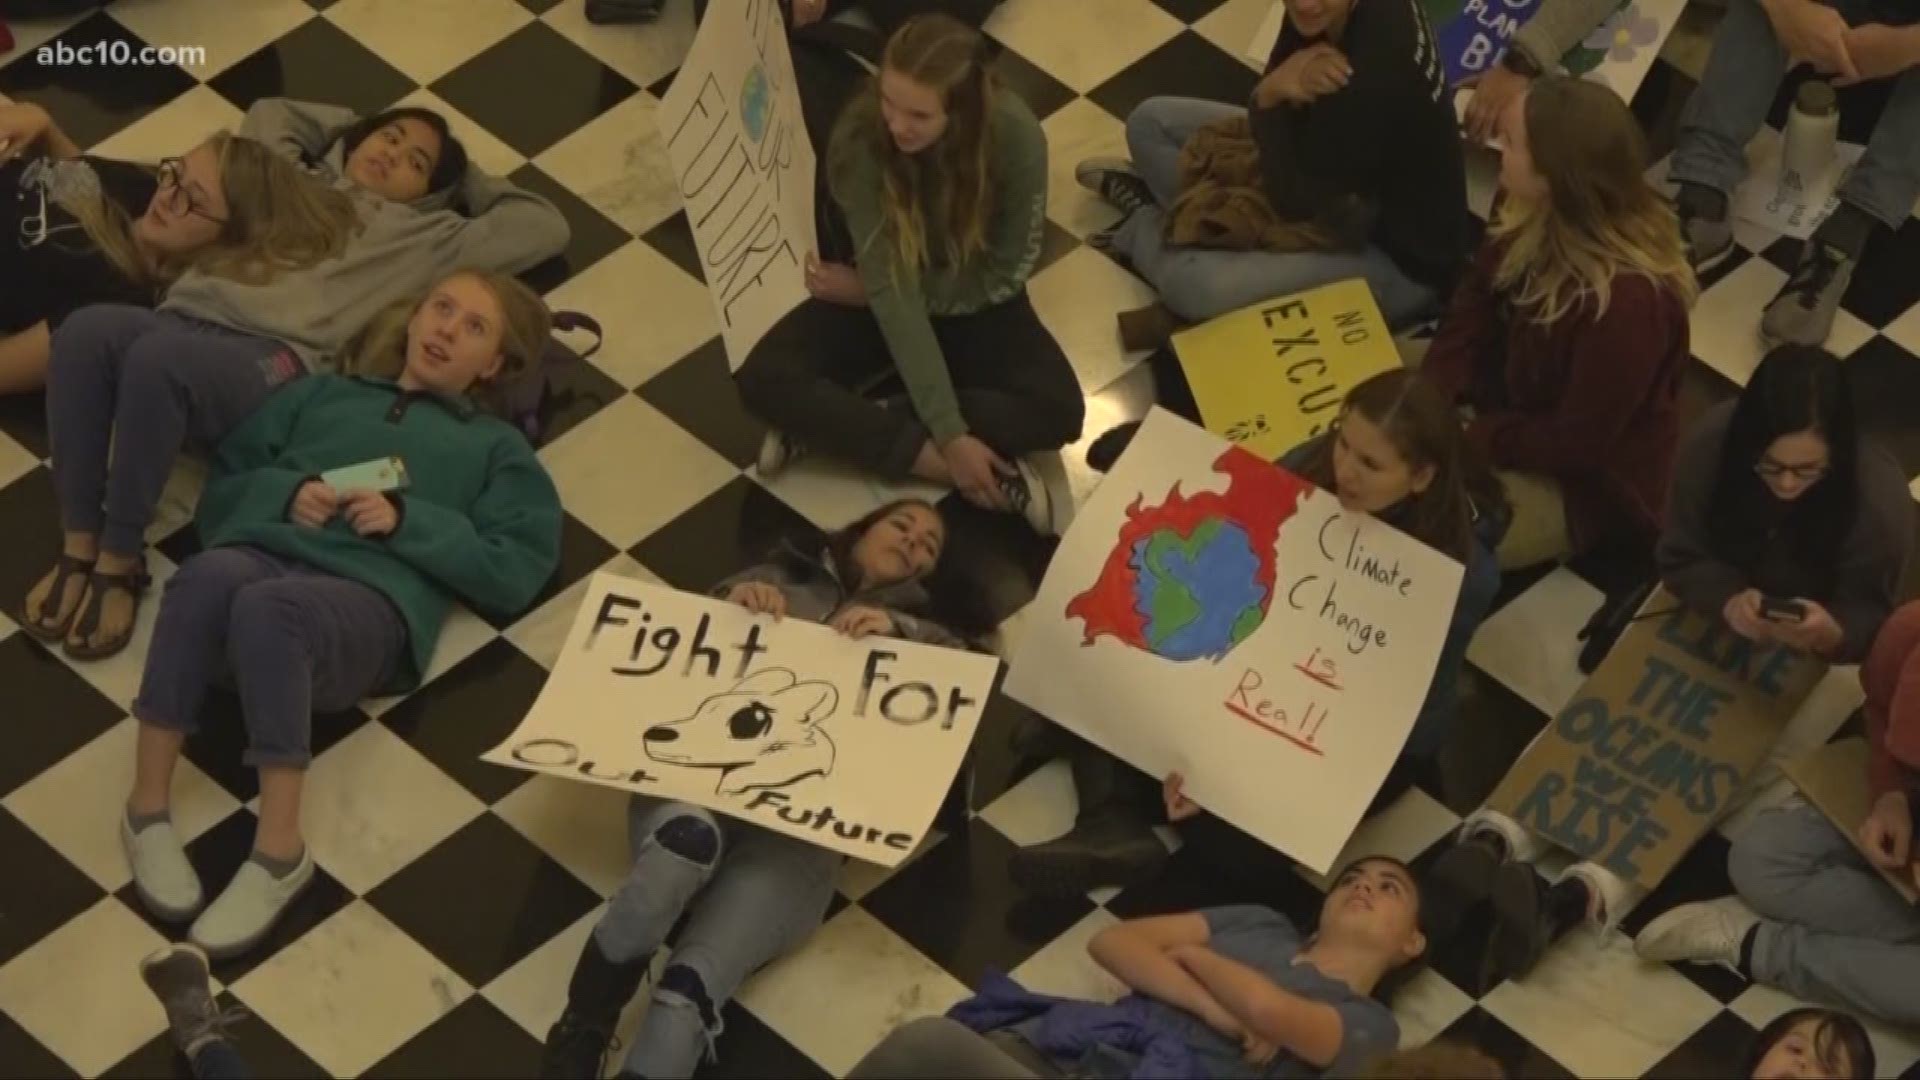 Hundreds of people gathered at the State Capitol in Sacramento for a climate protest. The event, led by teenagers, called on state lawmakers to do more.